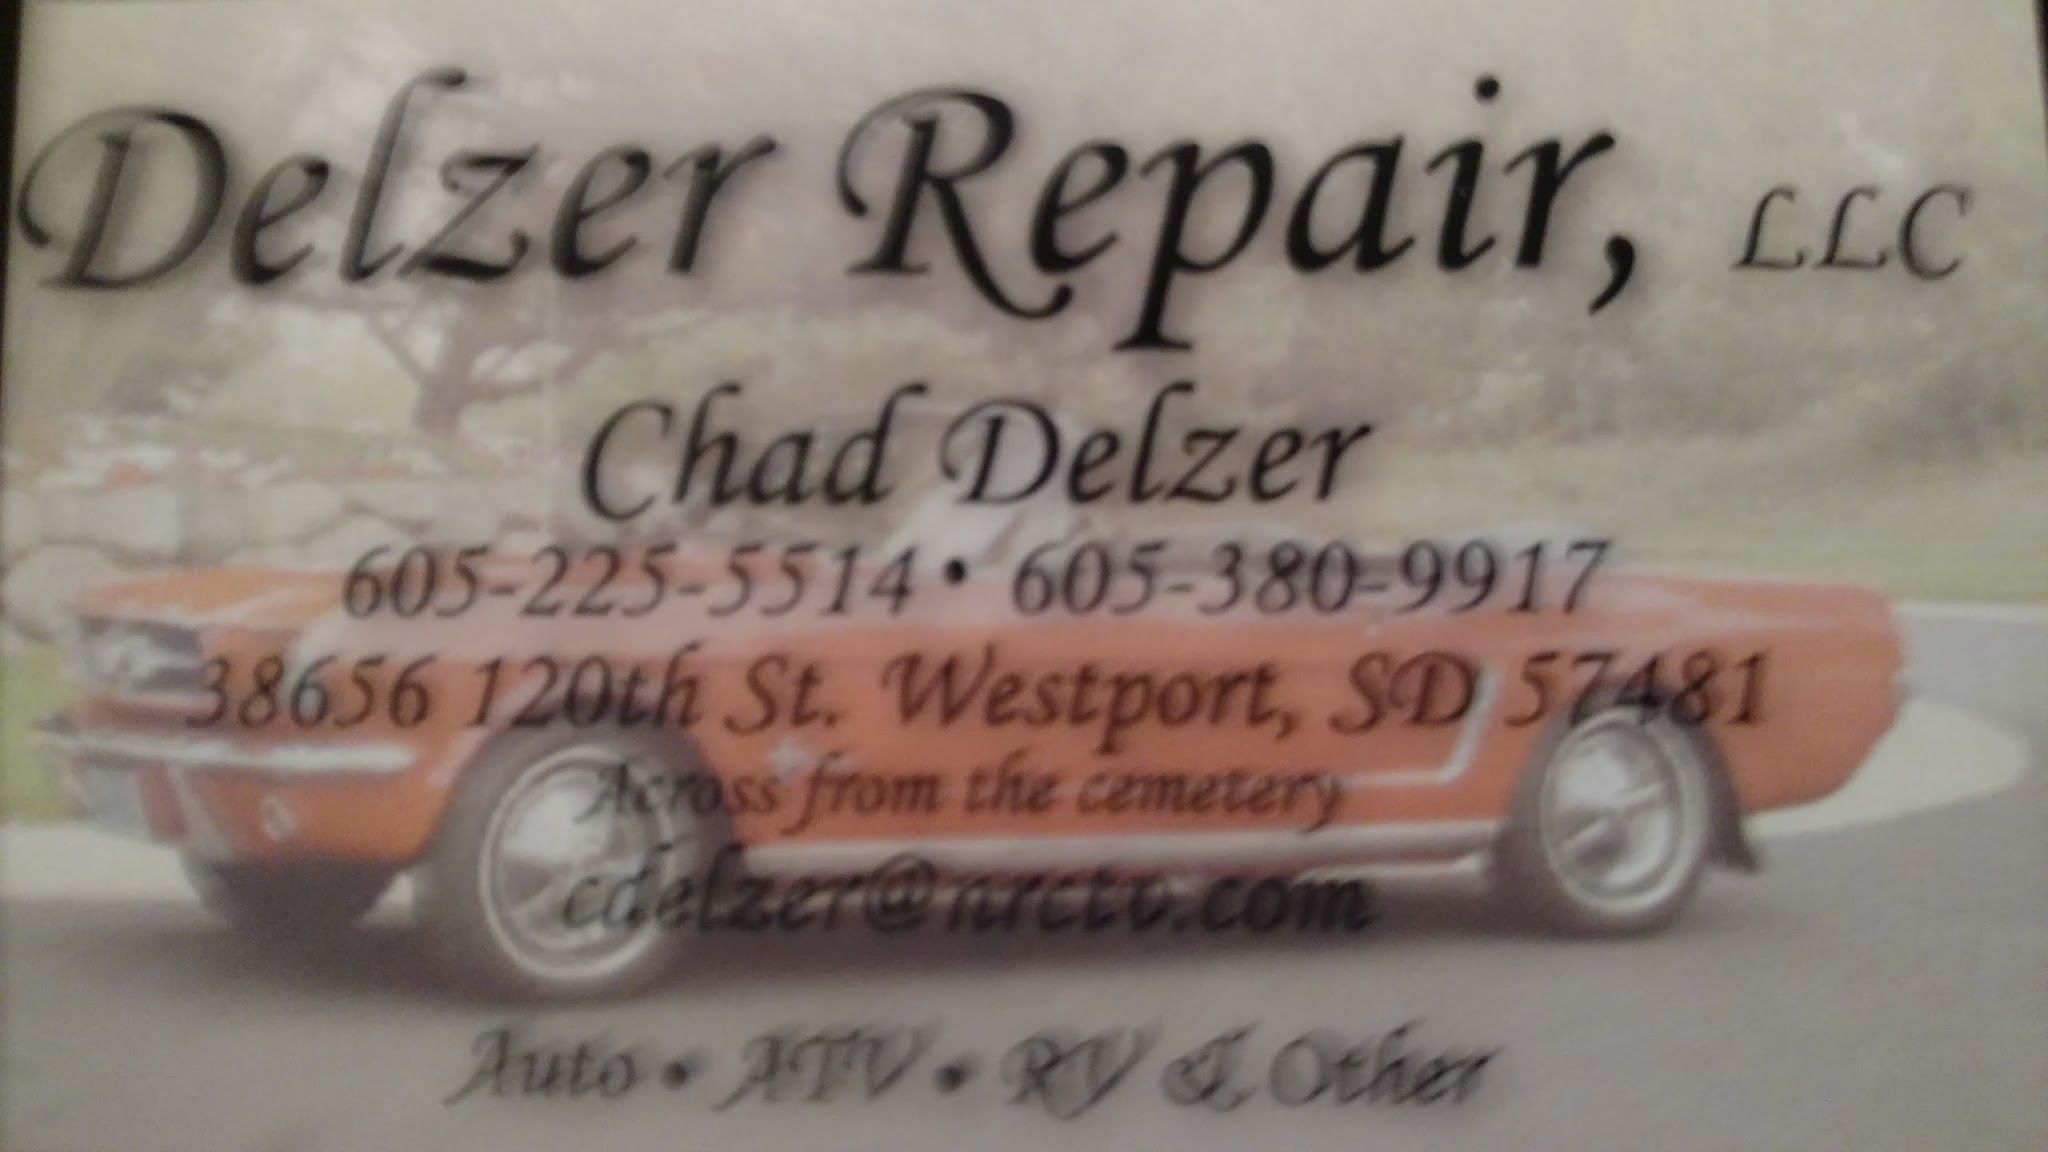 Services & Products Delzer Repair in Westport SD